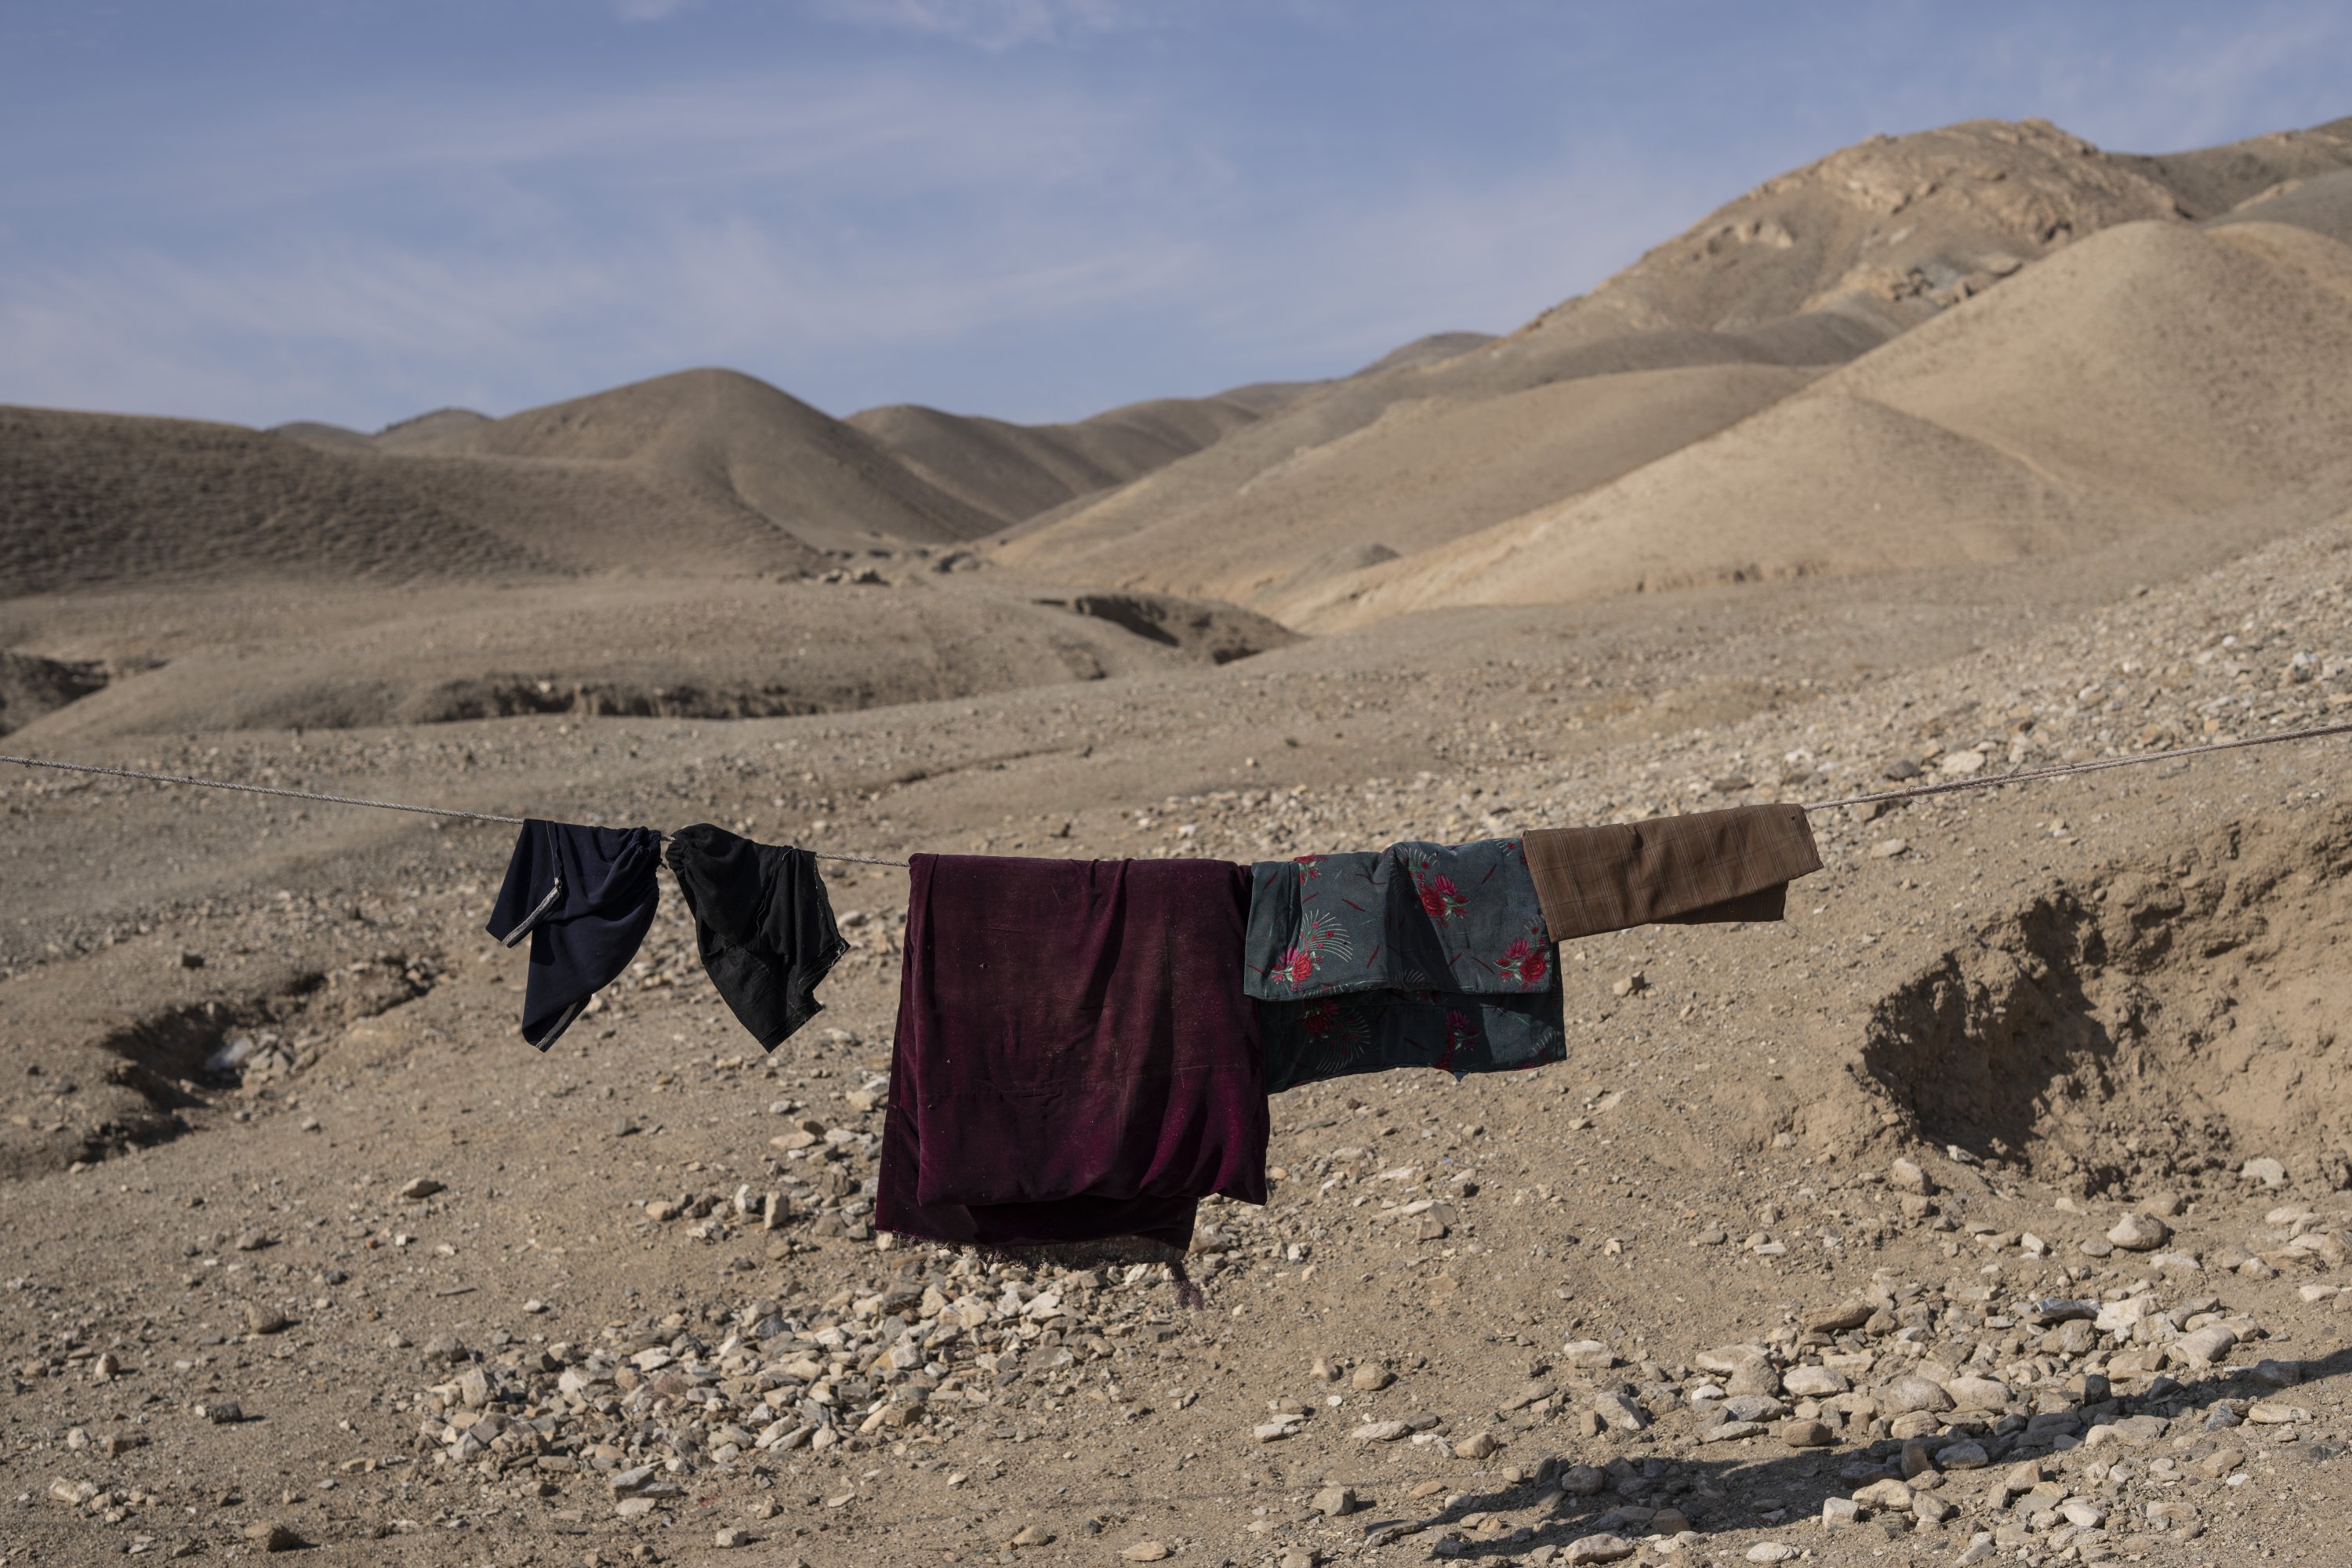 Clothes hang on a rope in Kamar Kalagh village outside Herat, Afghanistan, Nov. 26, 2021. (AP Photo)